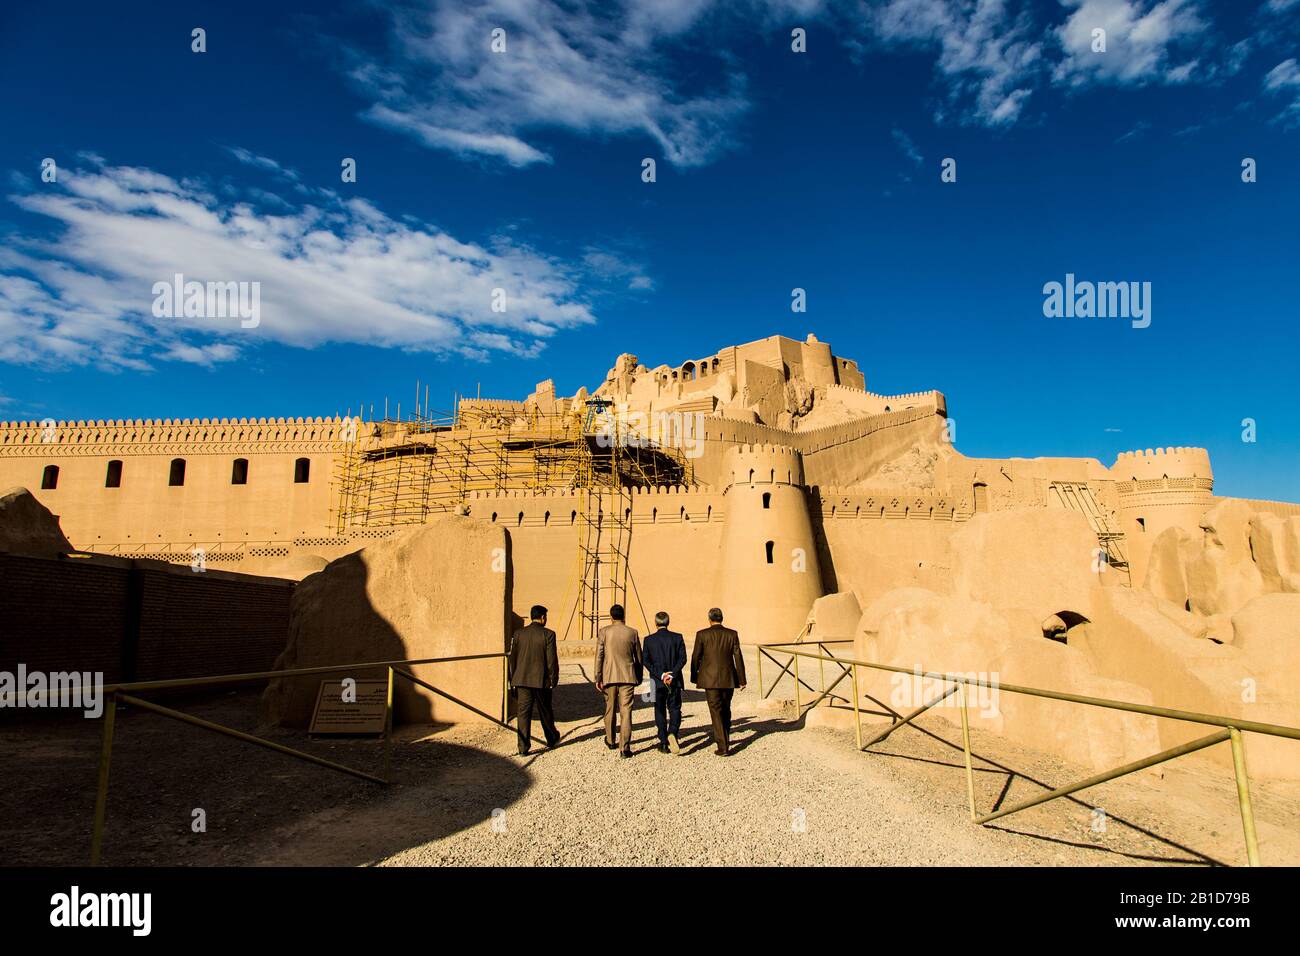 People visit restored Arg-e Bam citadel, the largest adobe building in the world, located in Bam Stock Photo